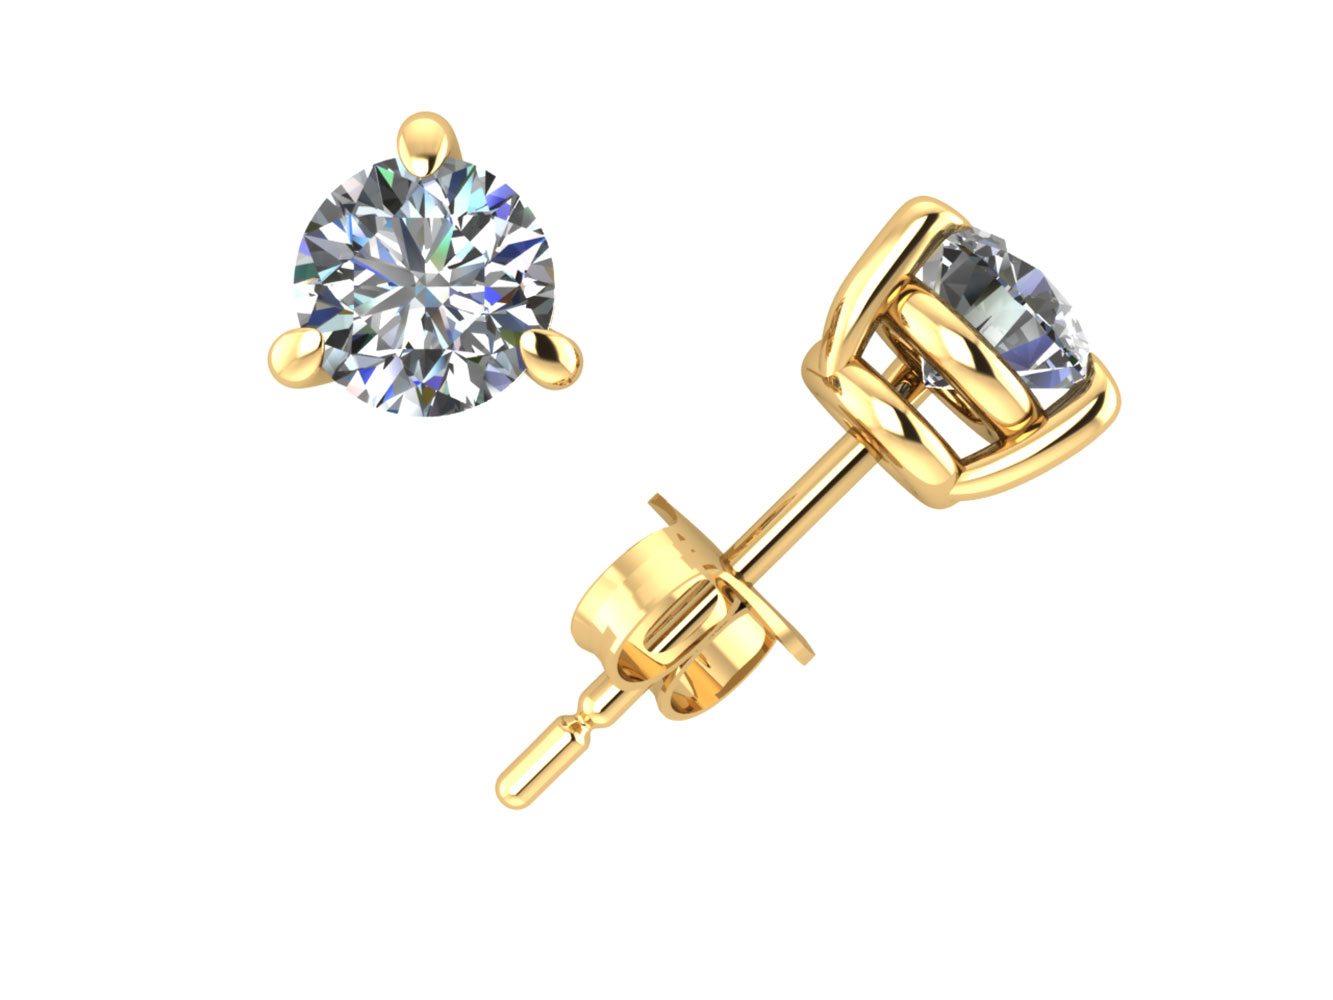 Jewel We Sell 1.00Ct Round Diamond Basket Solitaire Stud Earrings 14k White or Yellow Gold 3Prong I SI2